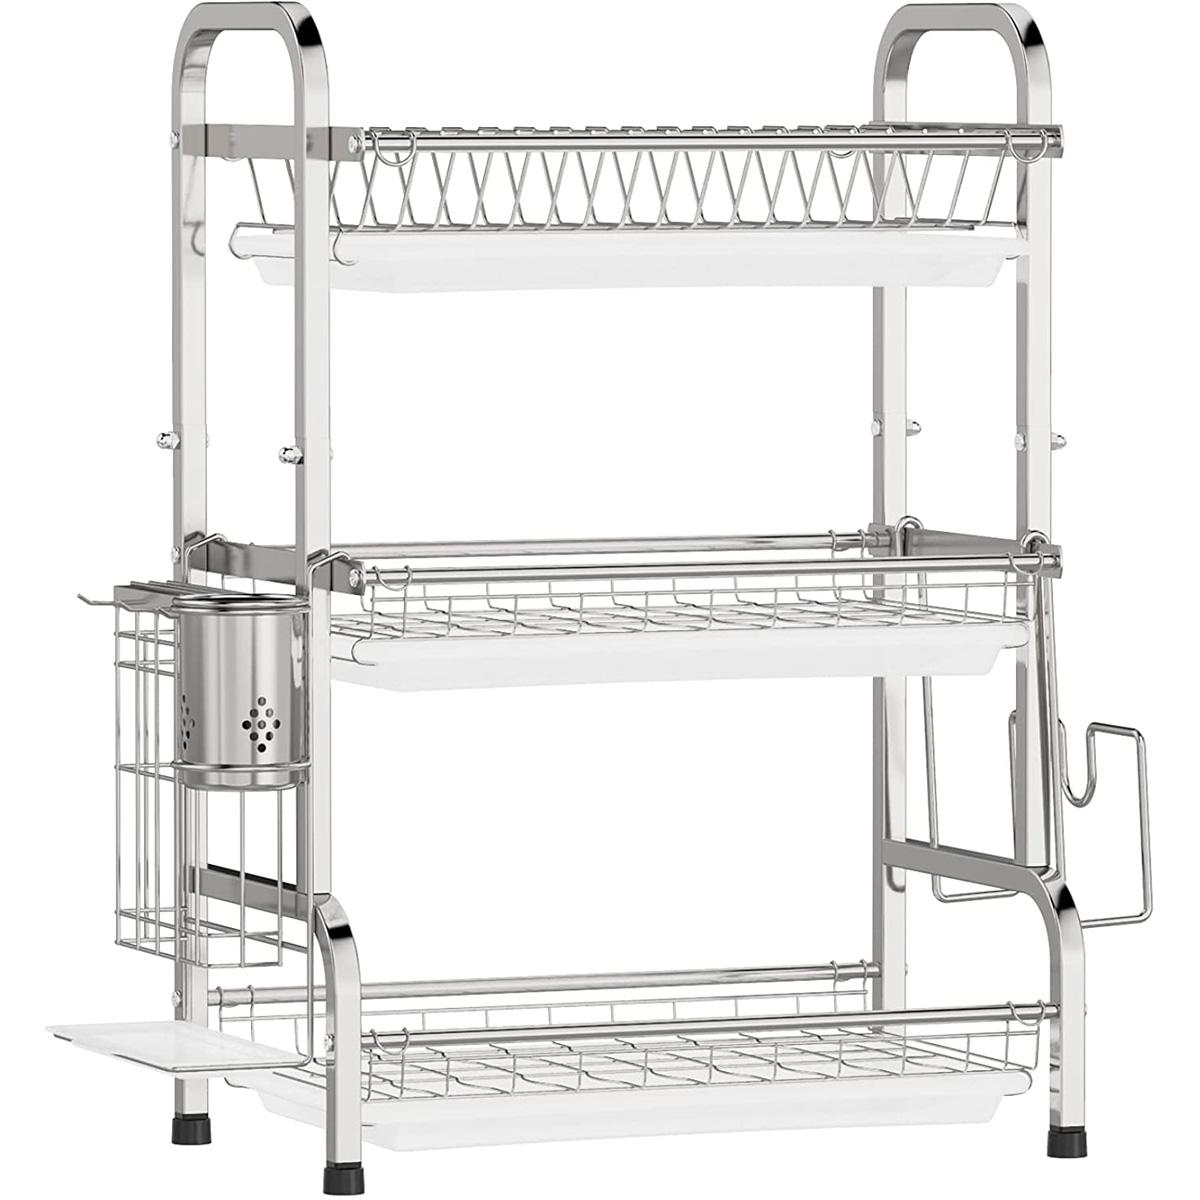 3-Tier Dish Drying Rack for $25.99 Shipped